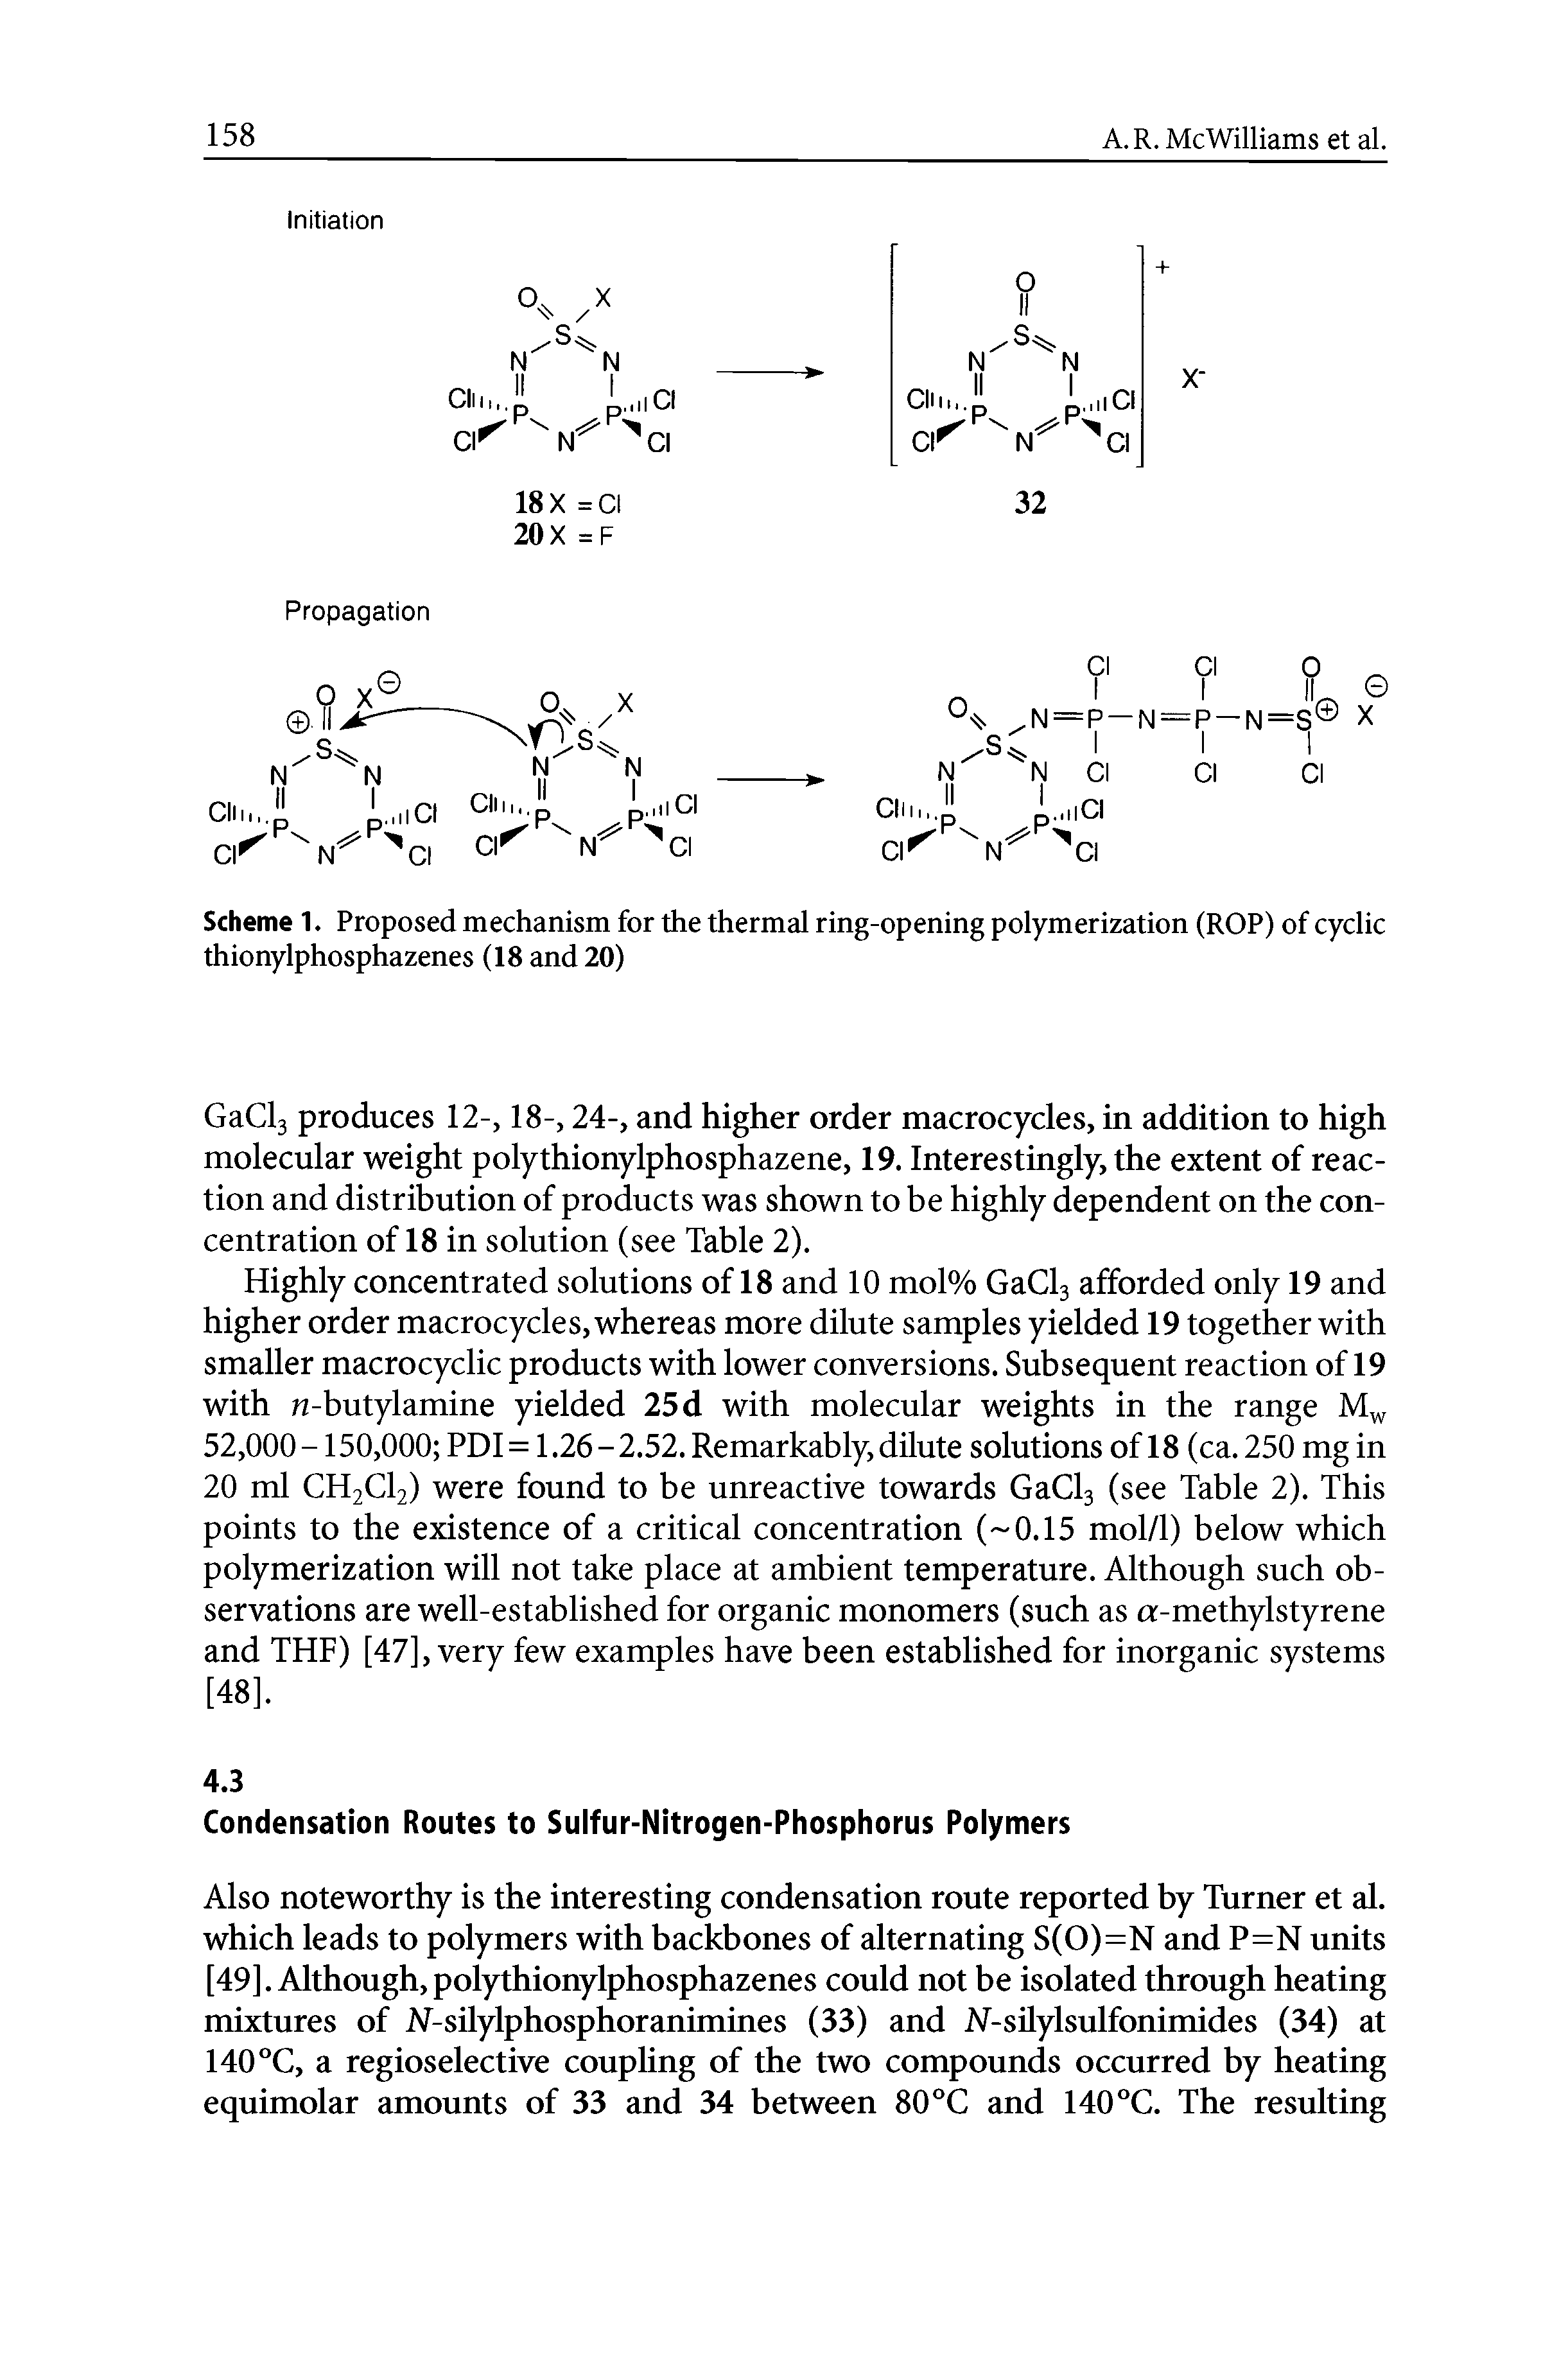 Scheme 1. Proposed mechanism for the thermal ring-opening polymerization (ROP) of cyclic thionylphosphazenes (18 and 20)...